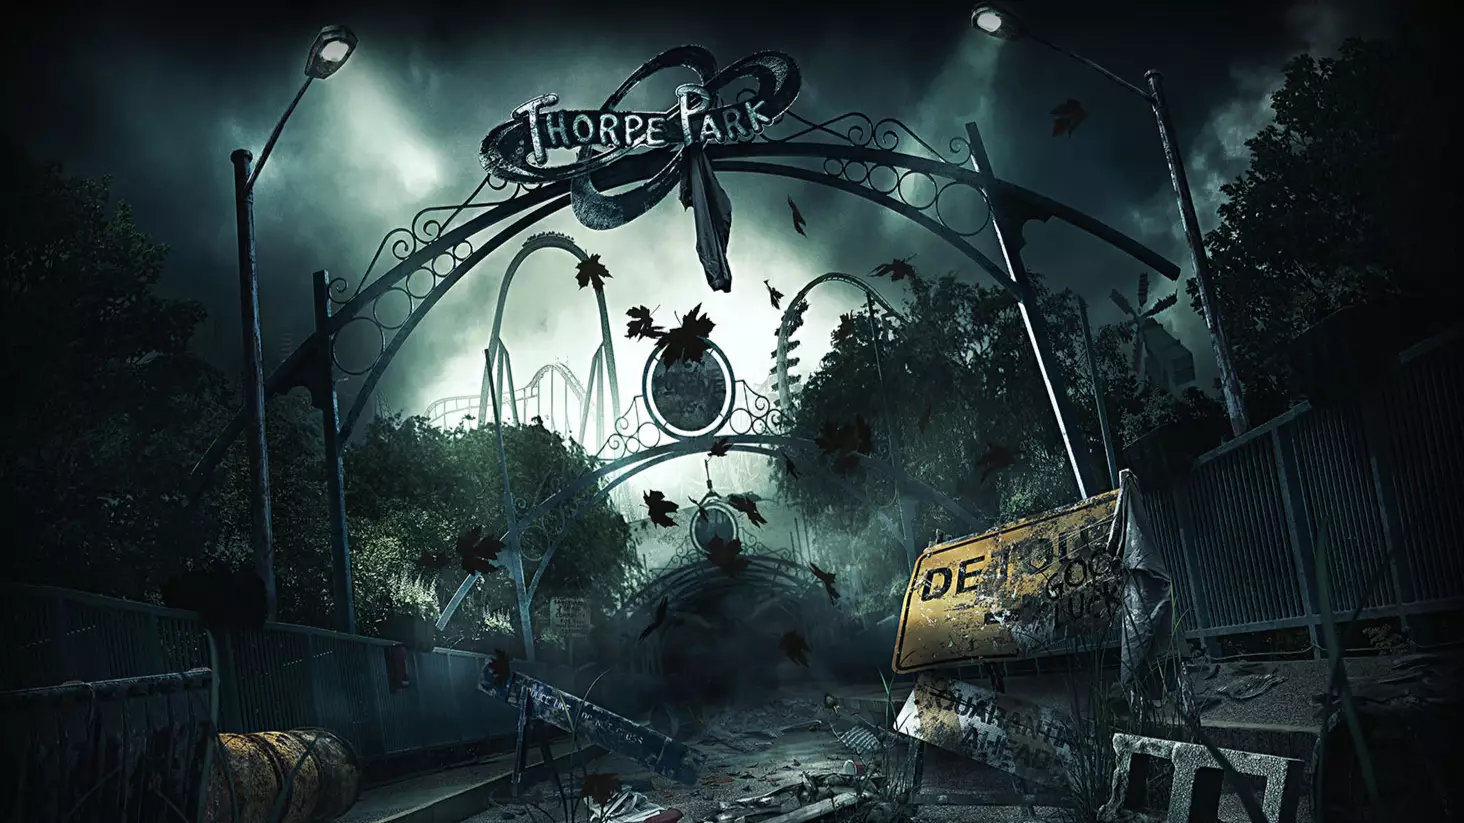 Thorpe Park Fright Night Returns This Week And It Looks Creepier Than Ever